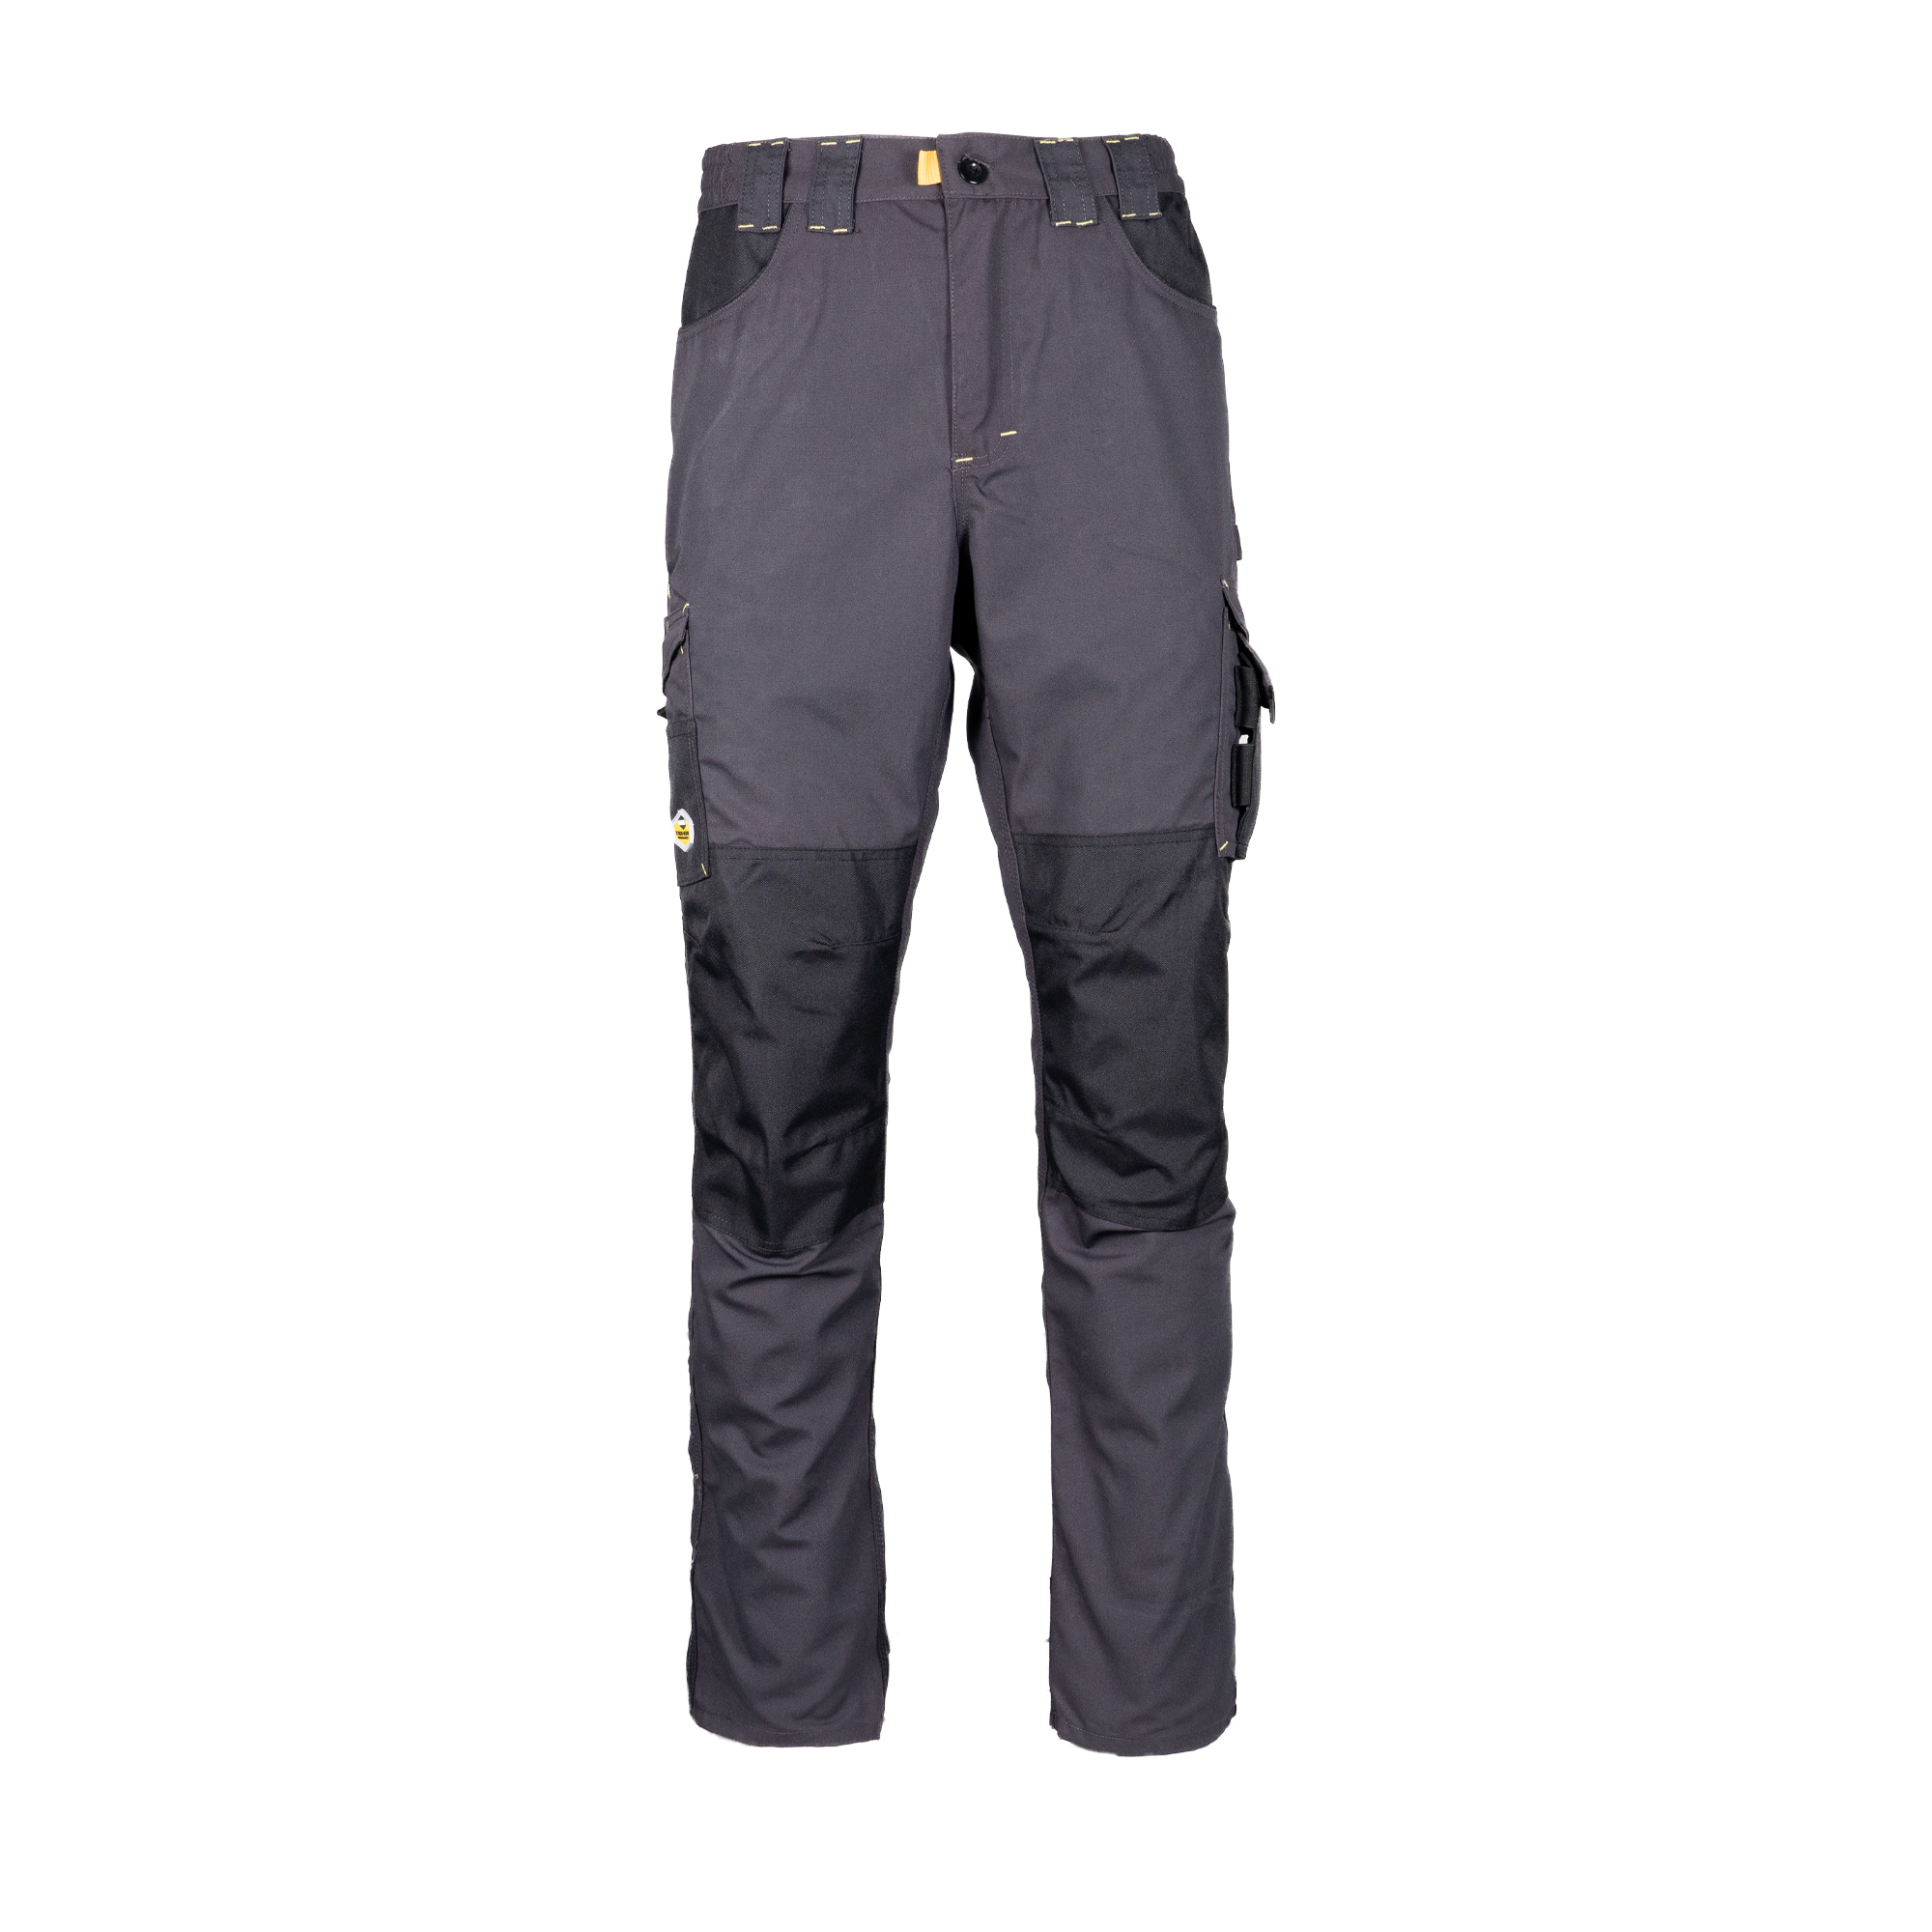 Details 77+ builders work trousers latest - in.cdgdbentre